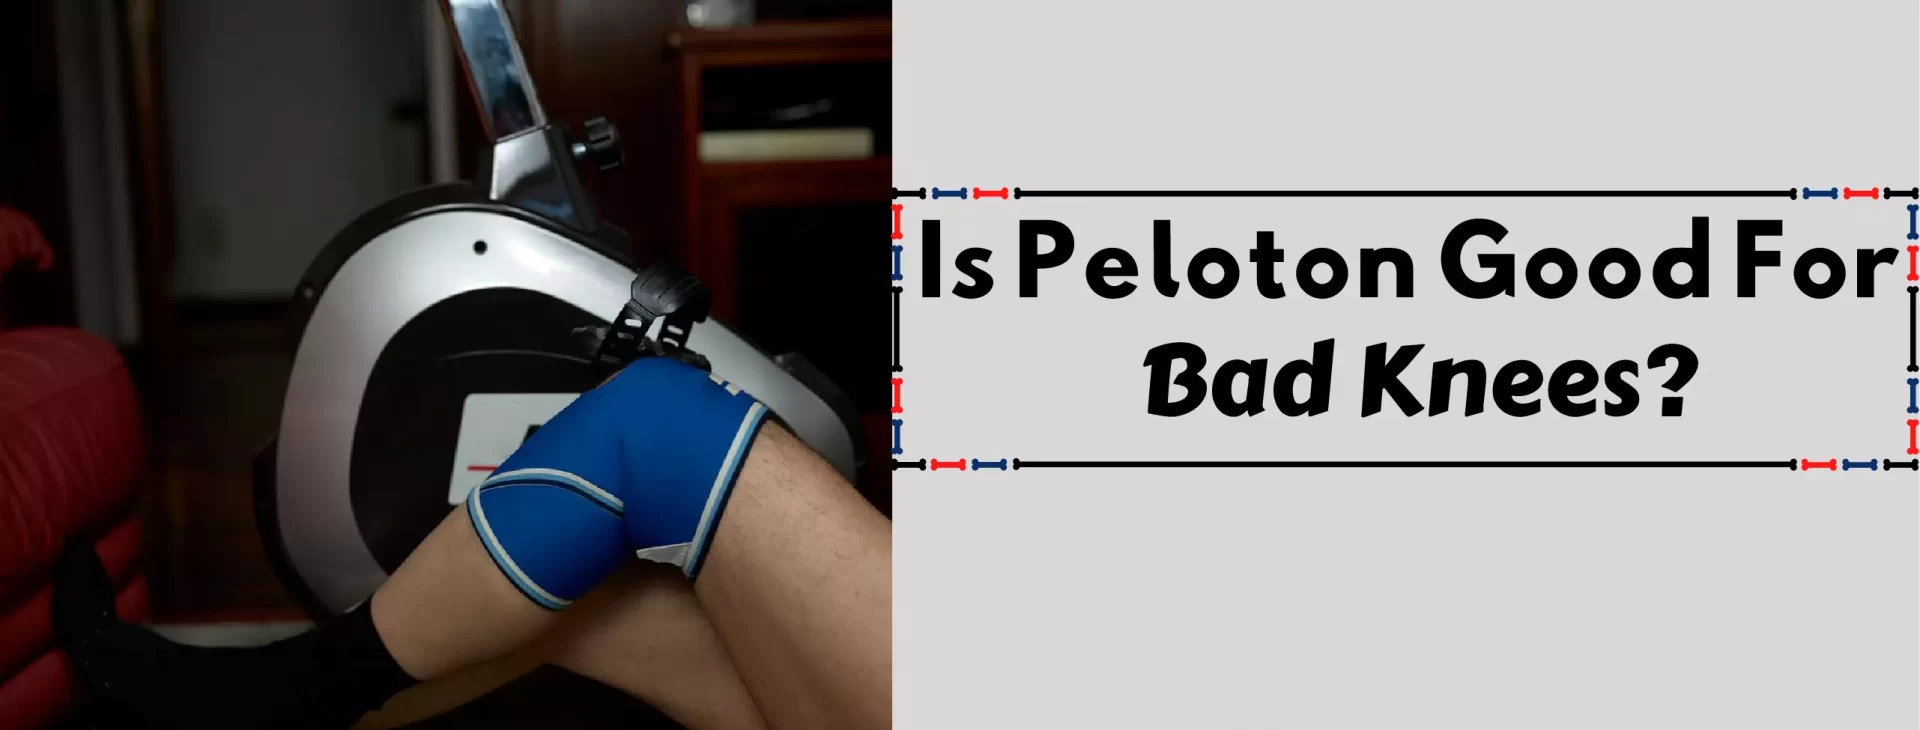 Is Peloton Good For Bad Knees